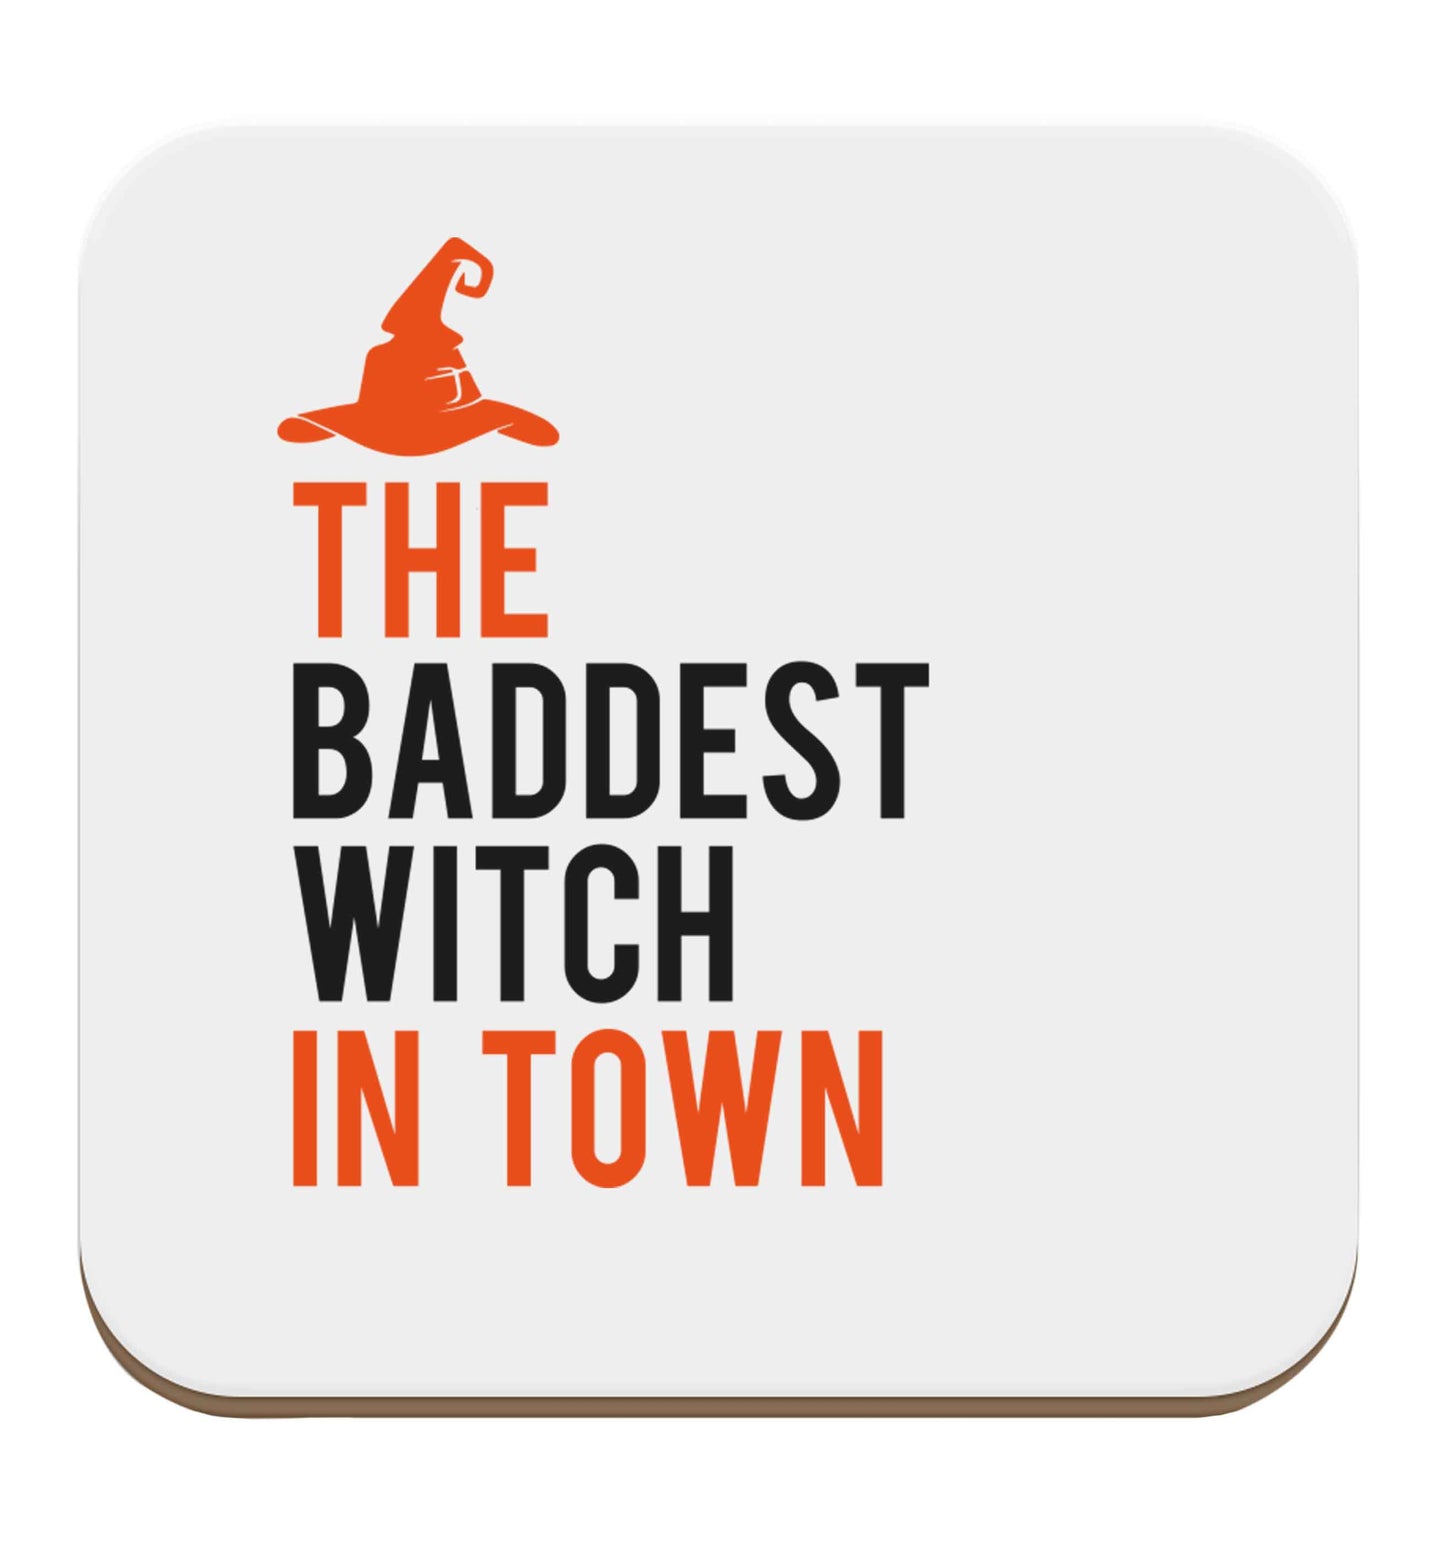 Badest witch in town set of four coasters